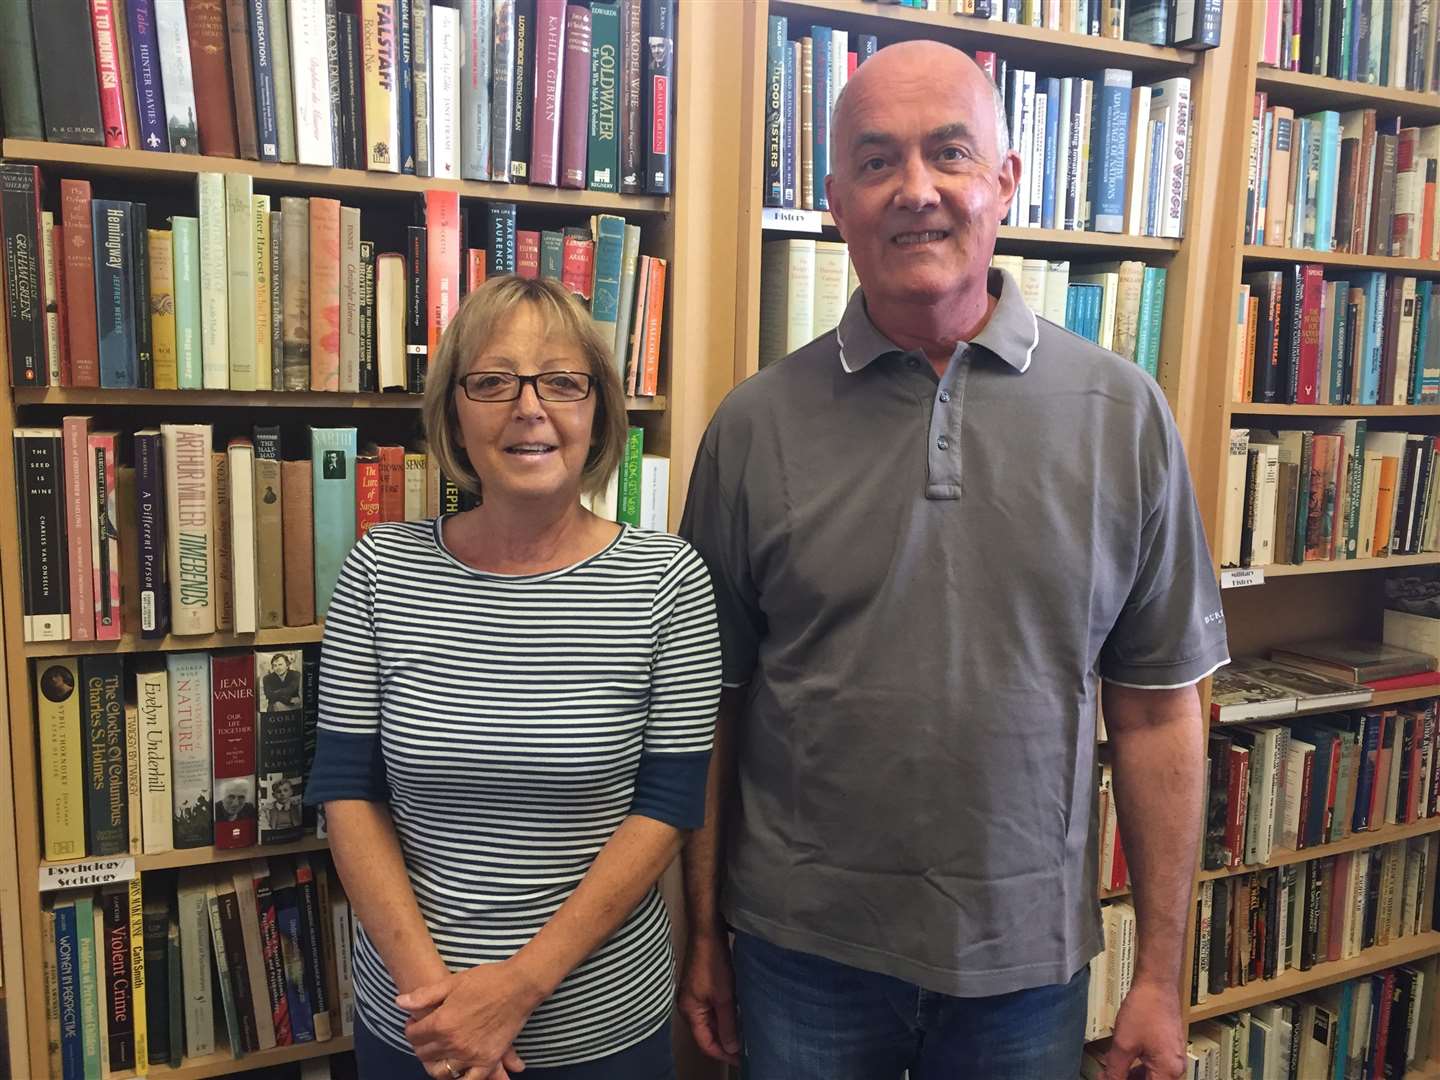 Tiziana Mazzoli and her partner Michael Dowling in their new book shop